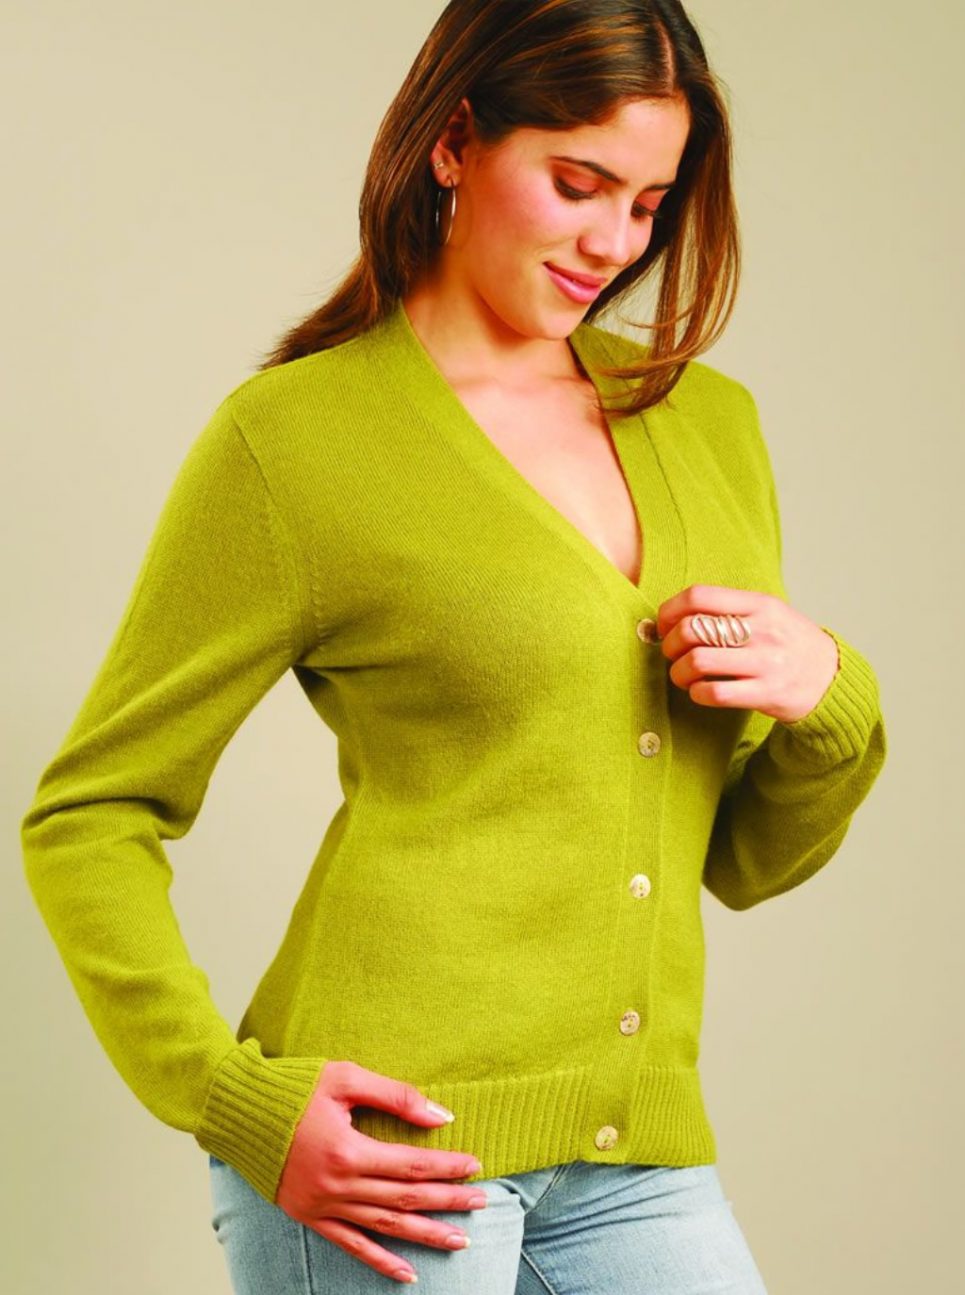 Lady’s Cardigan V Neck Sweater with button front